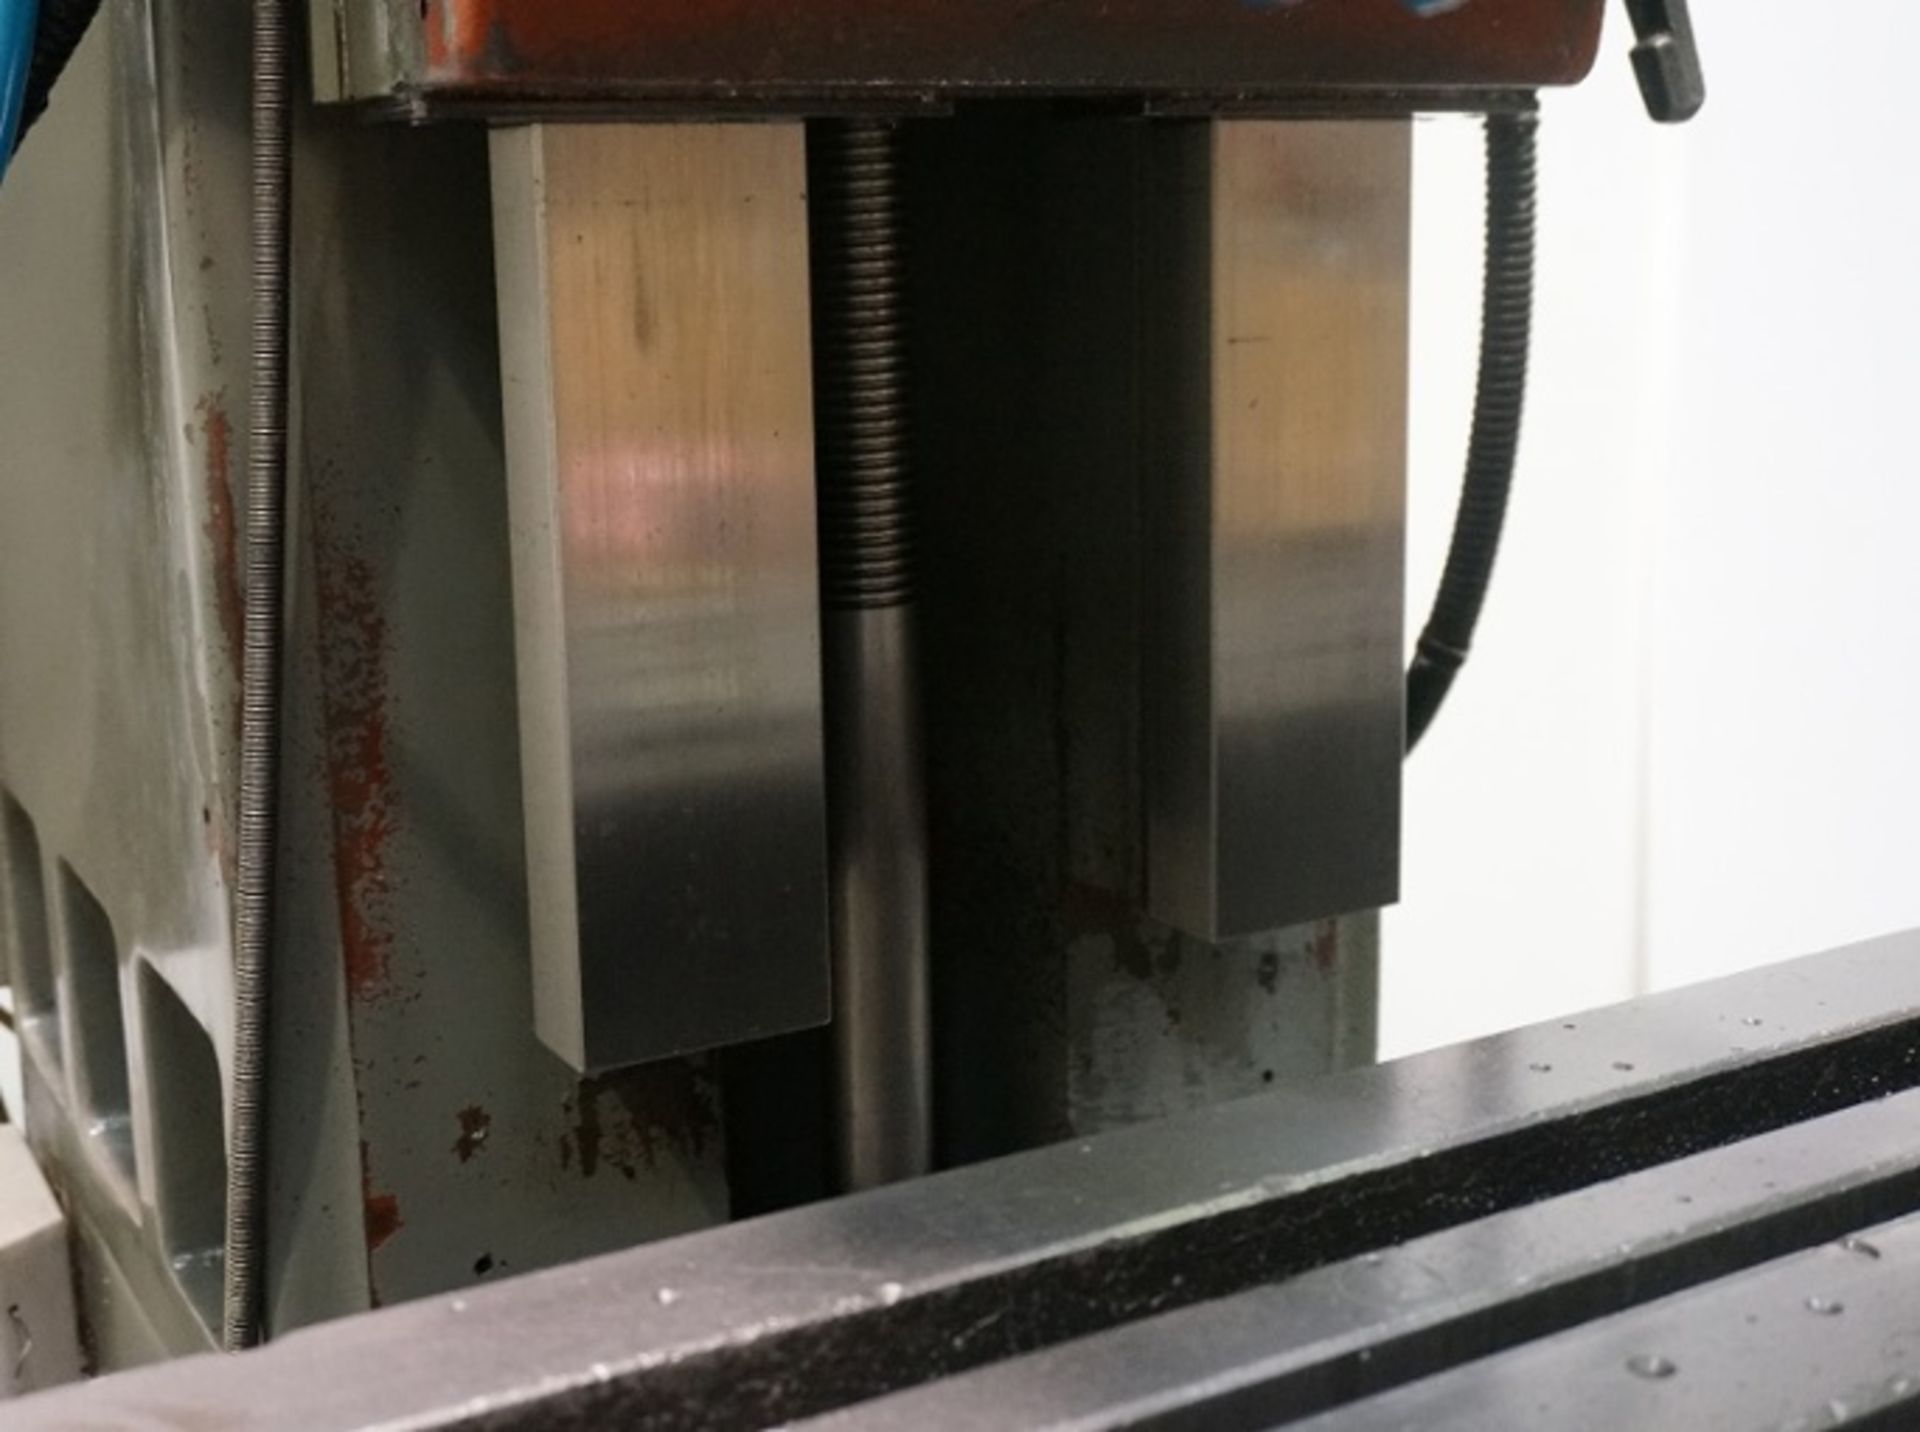 XYZ 4000 CNC Bed Mill - Image 5 of 7